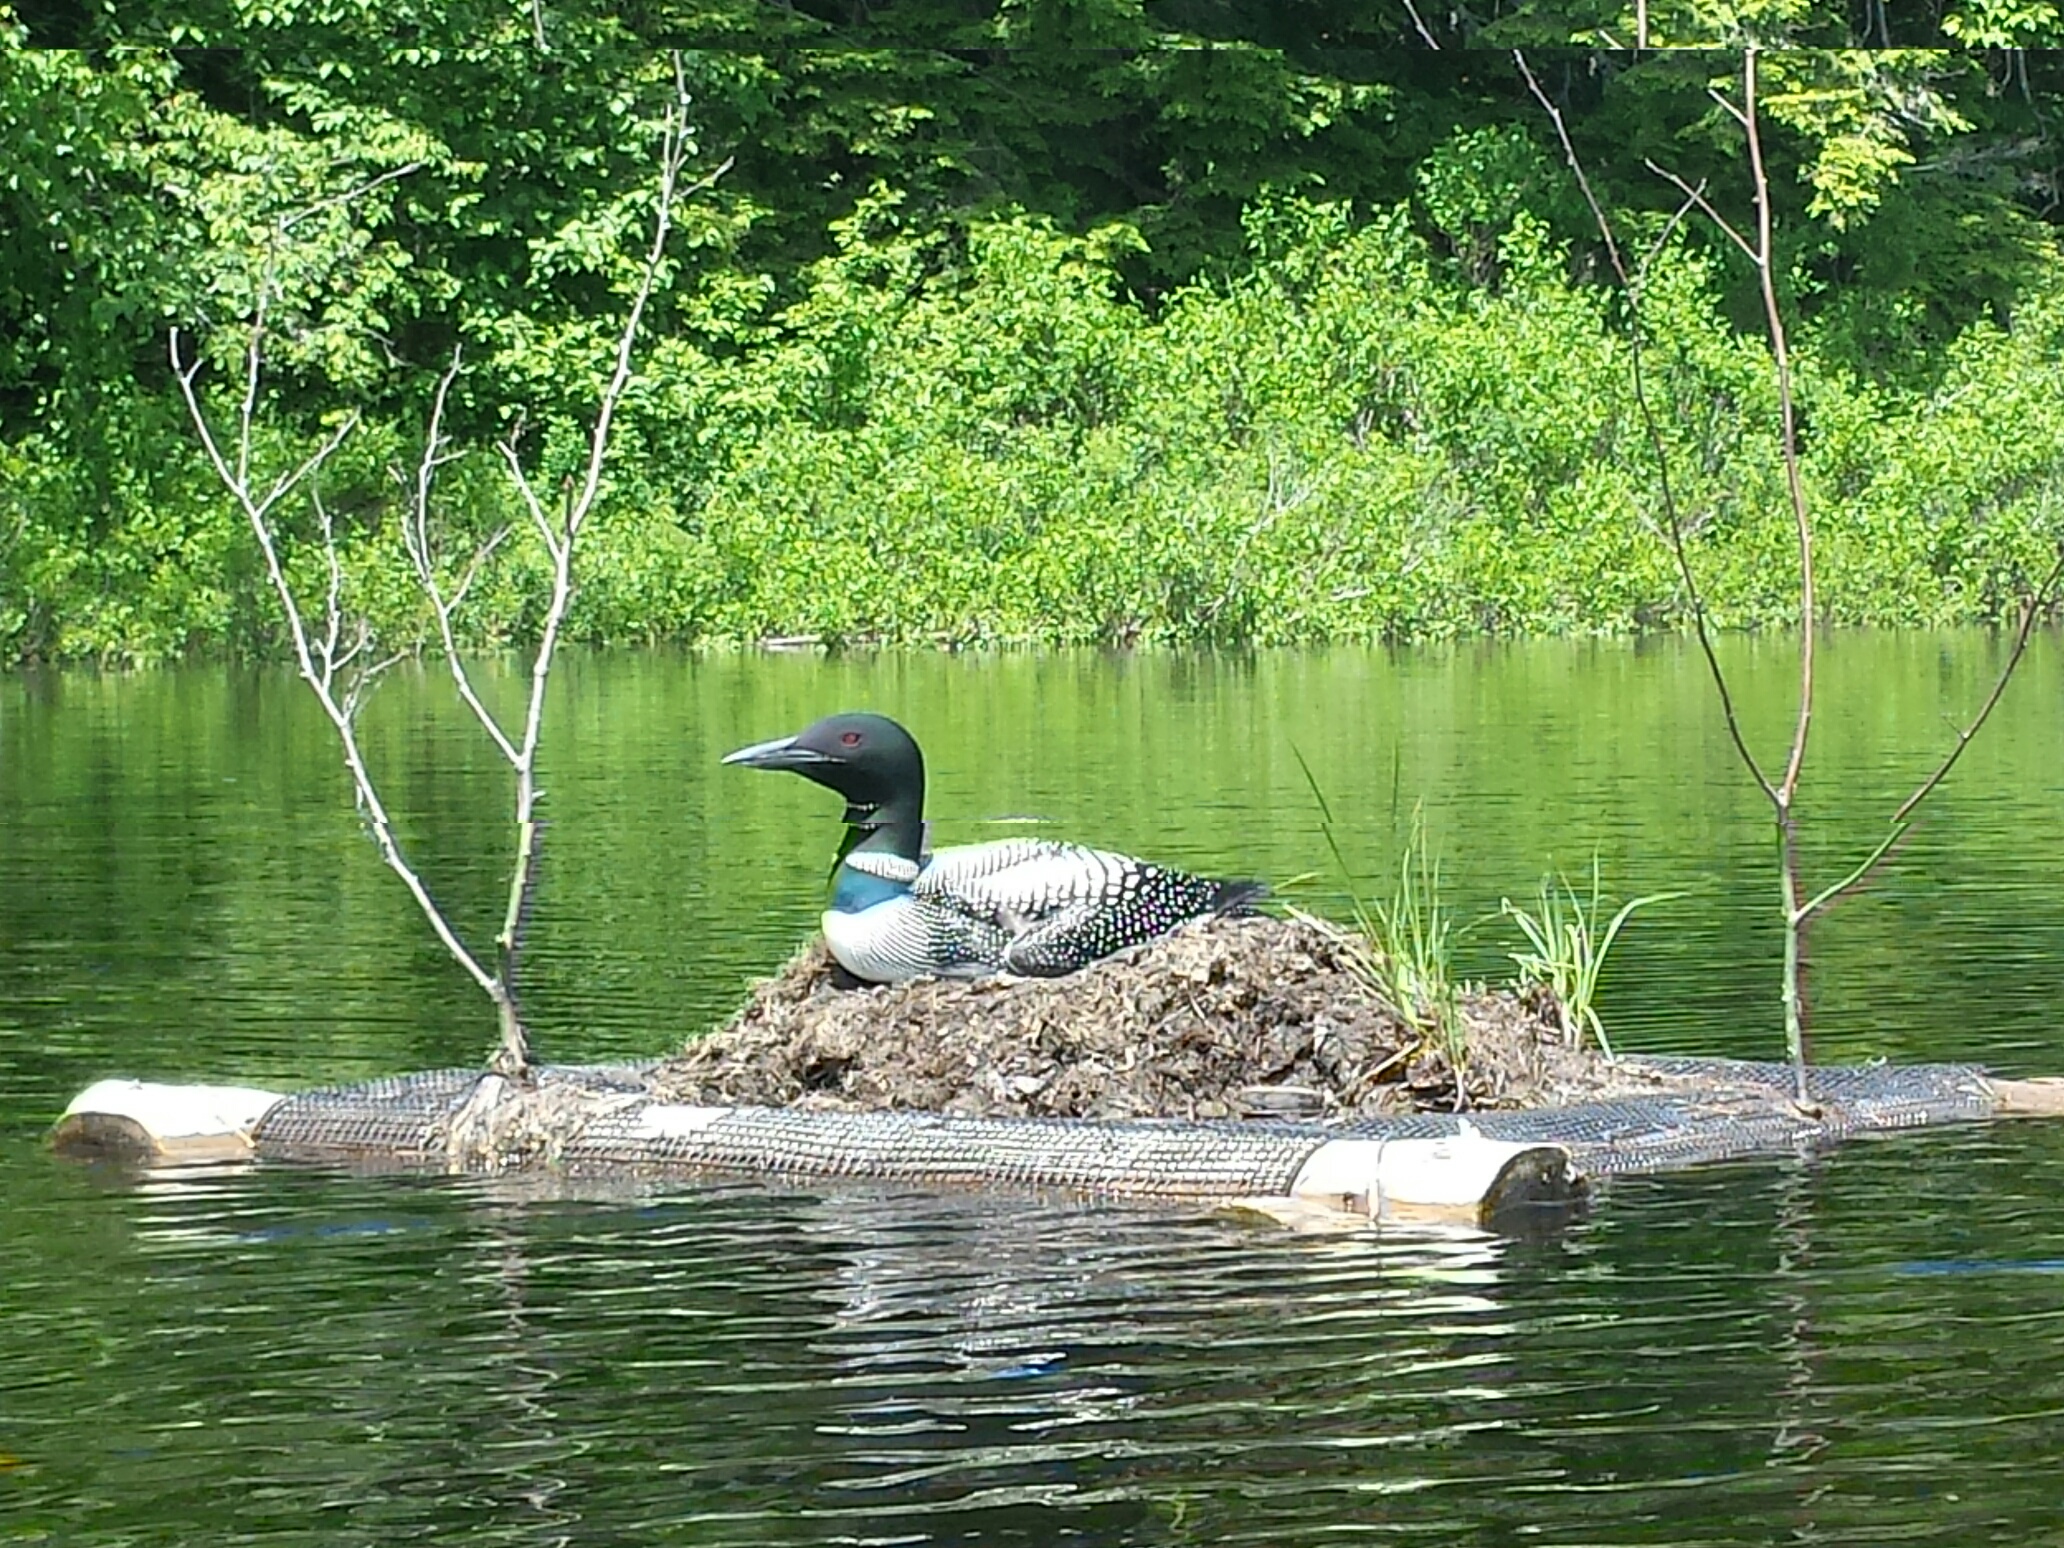 Lake Associations can apply for loon nesting platforms as a